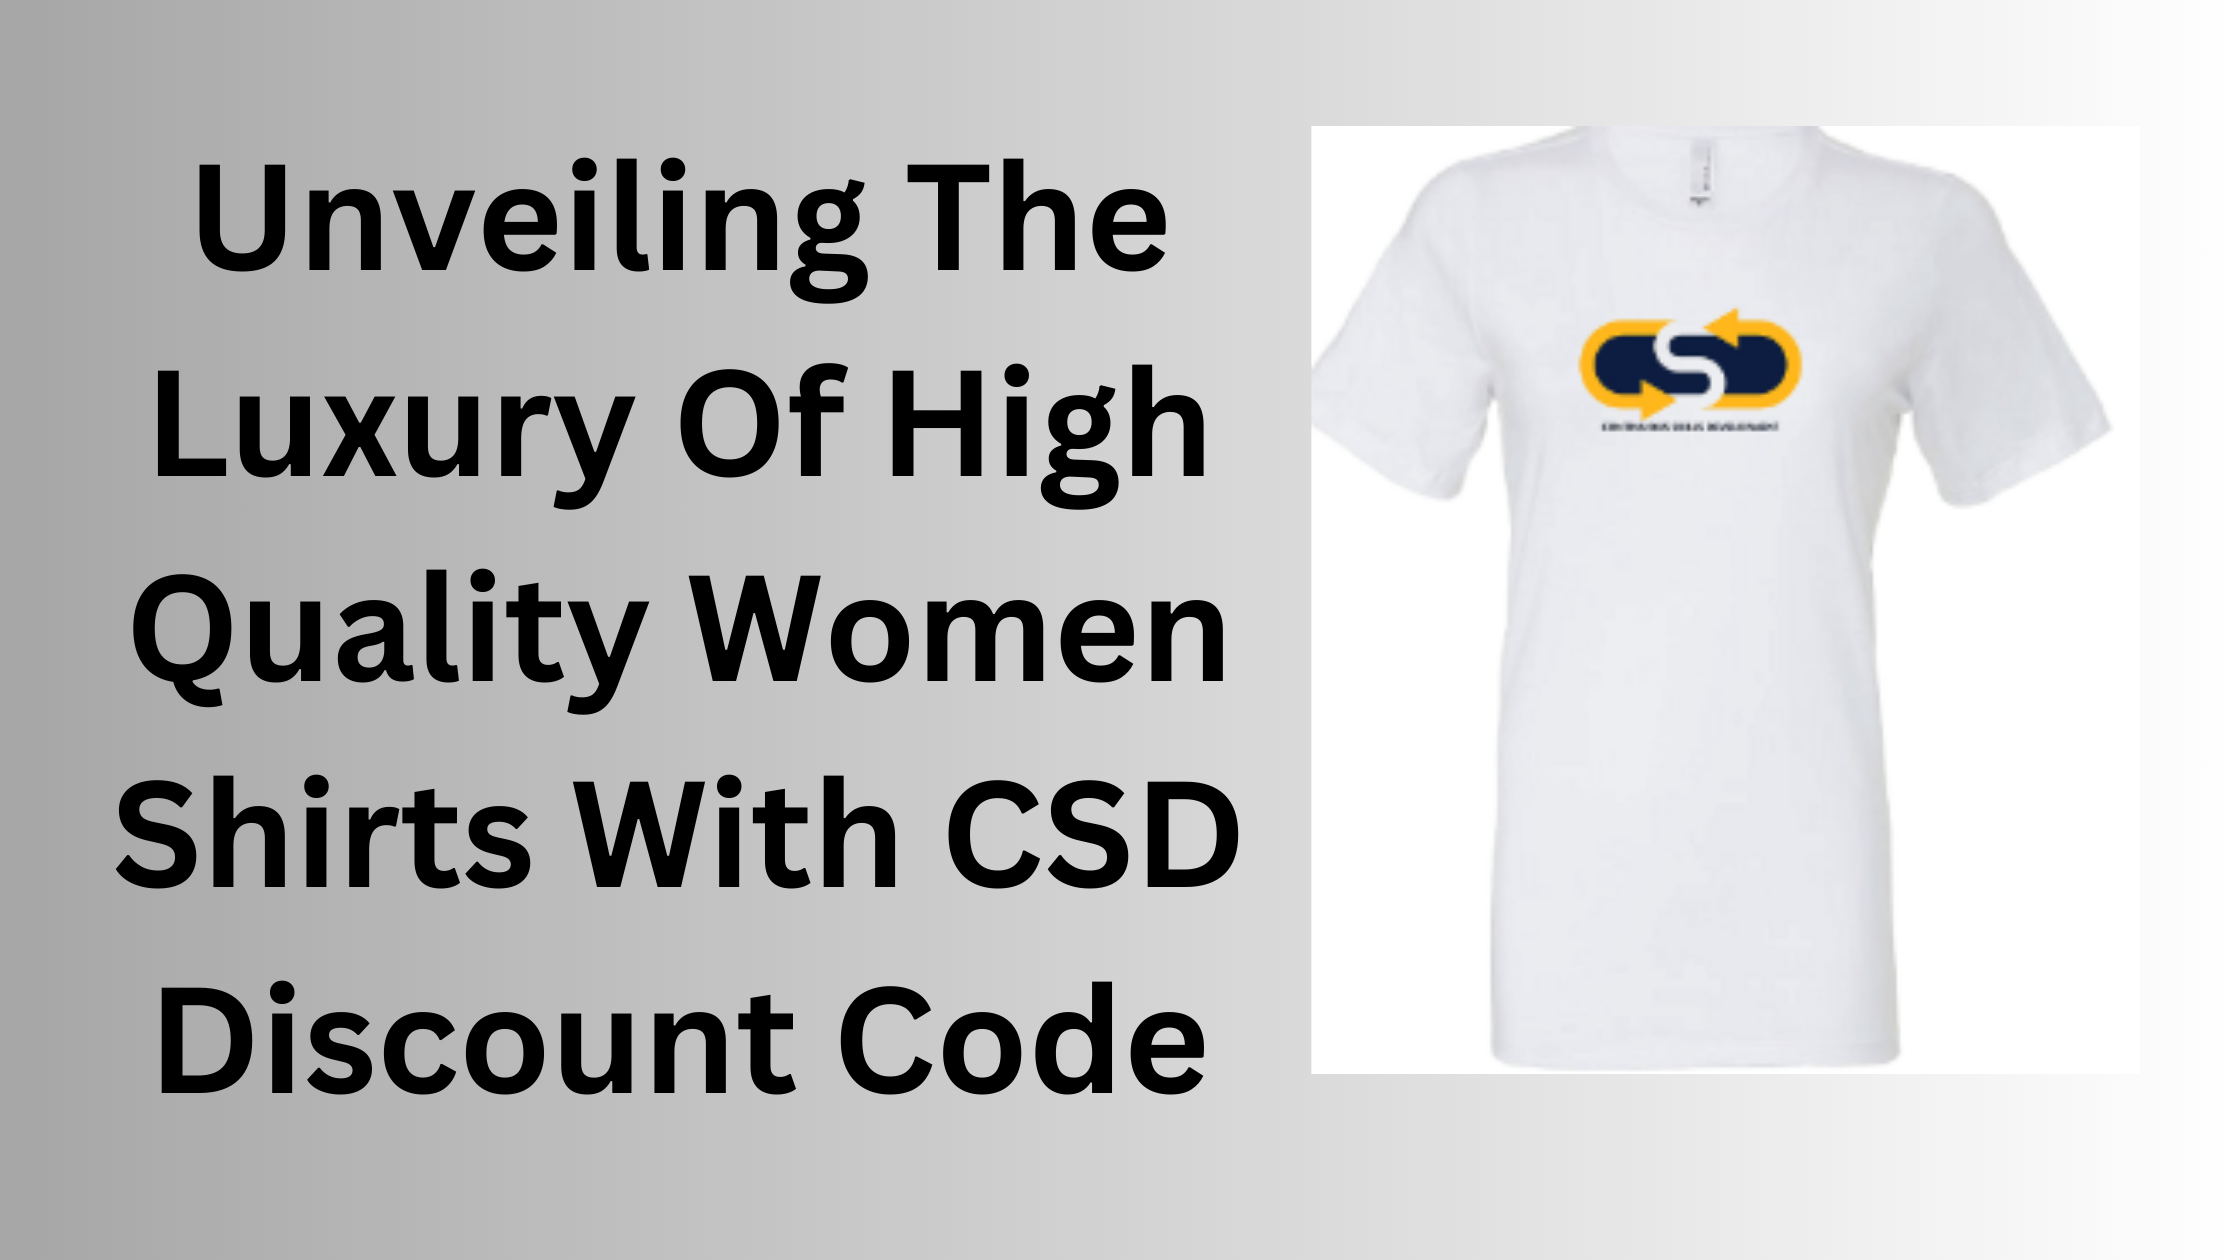 Unveiling The Luxury Of High Quality Women Shirts With CSD Discount Code